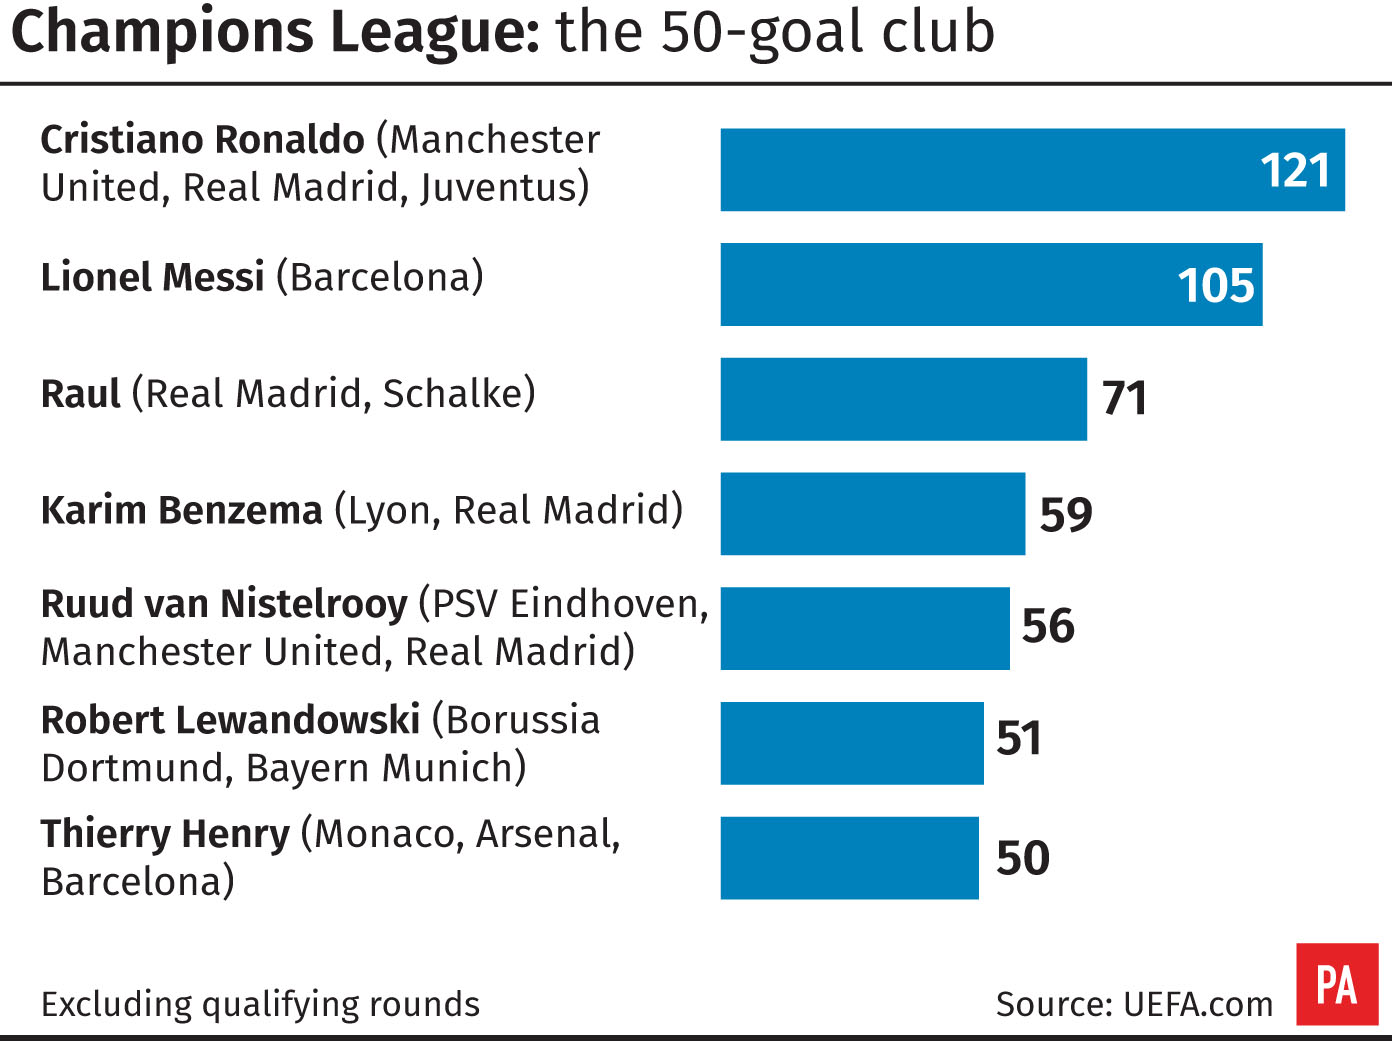 Players with 50 goals in the Champions League proper